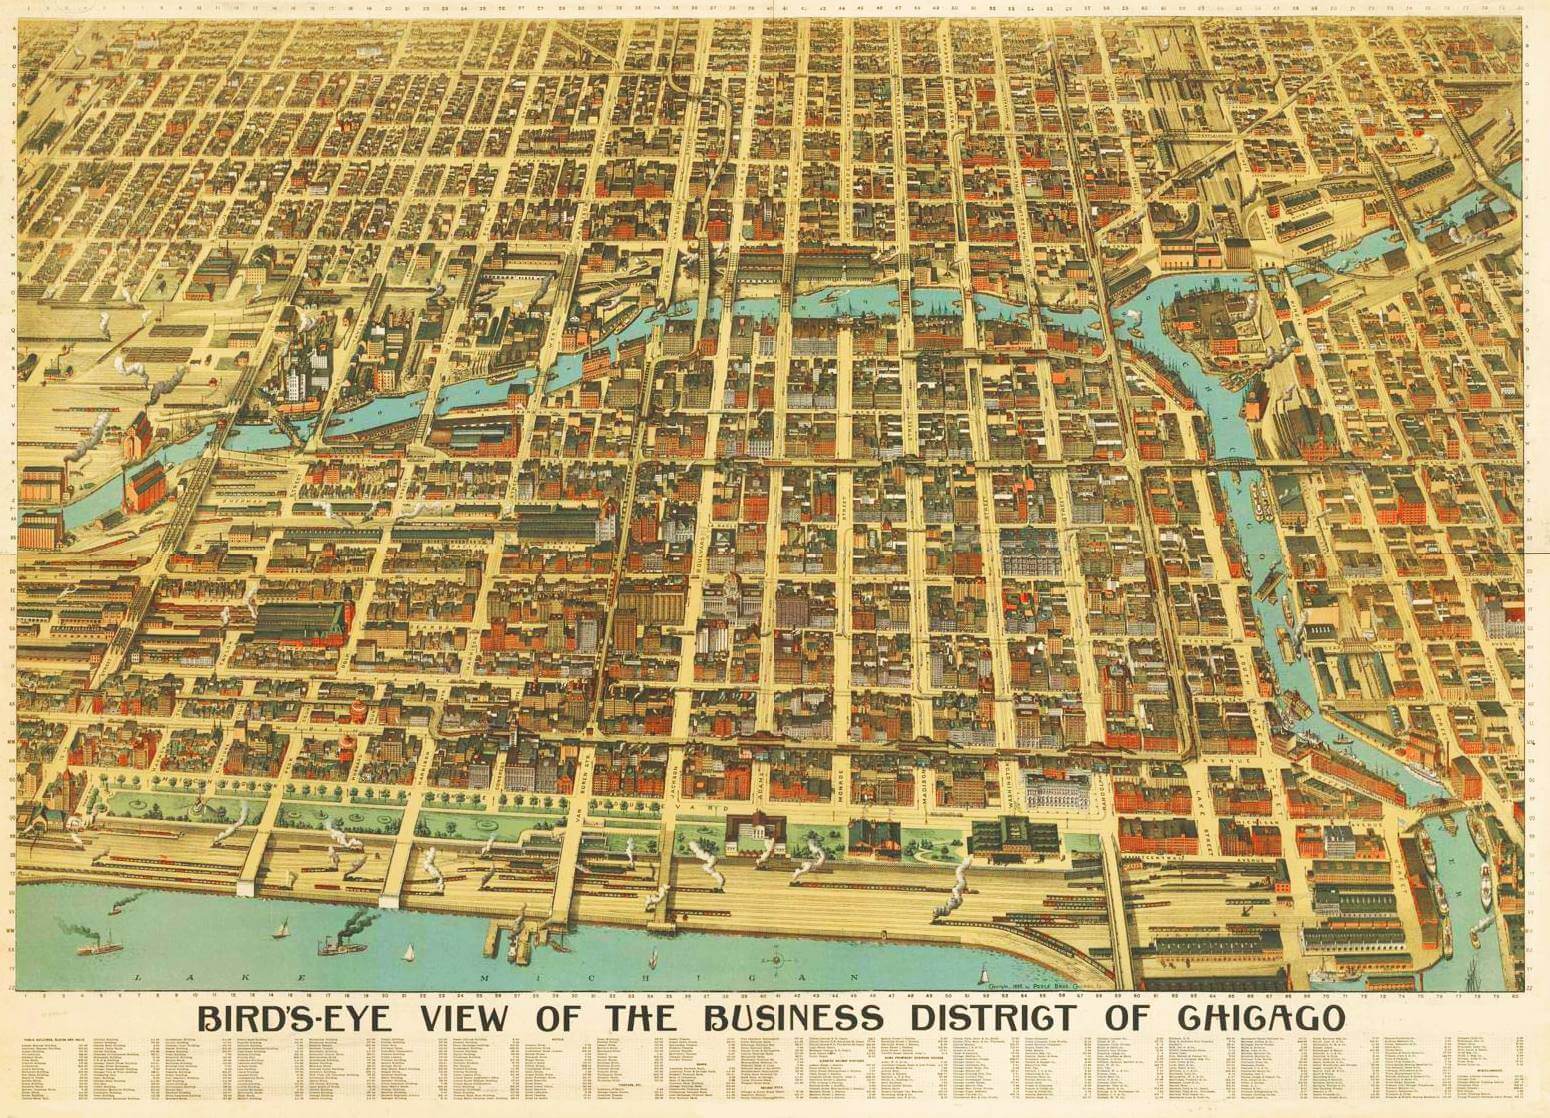 An early 20th century map of the Chicago business district.